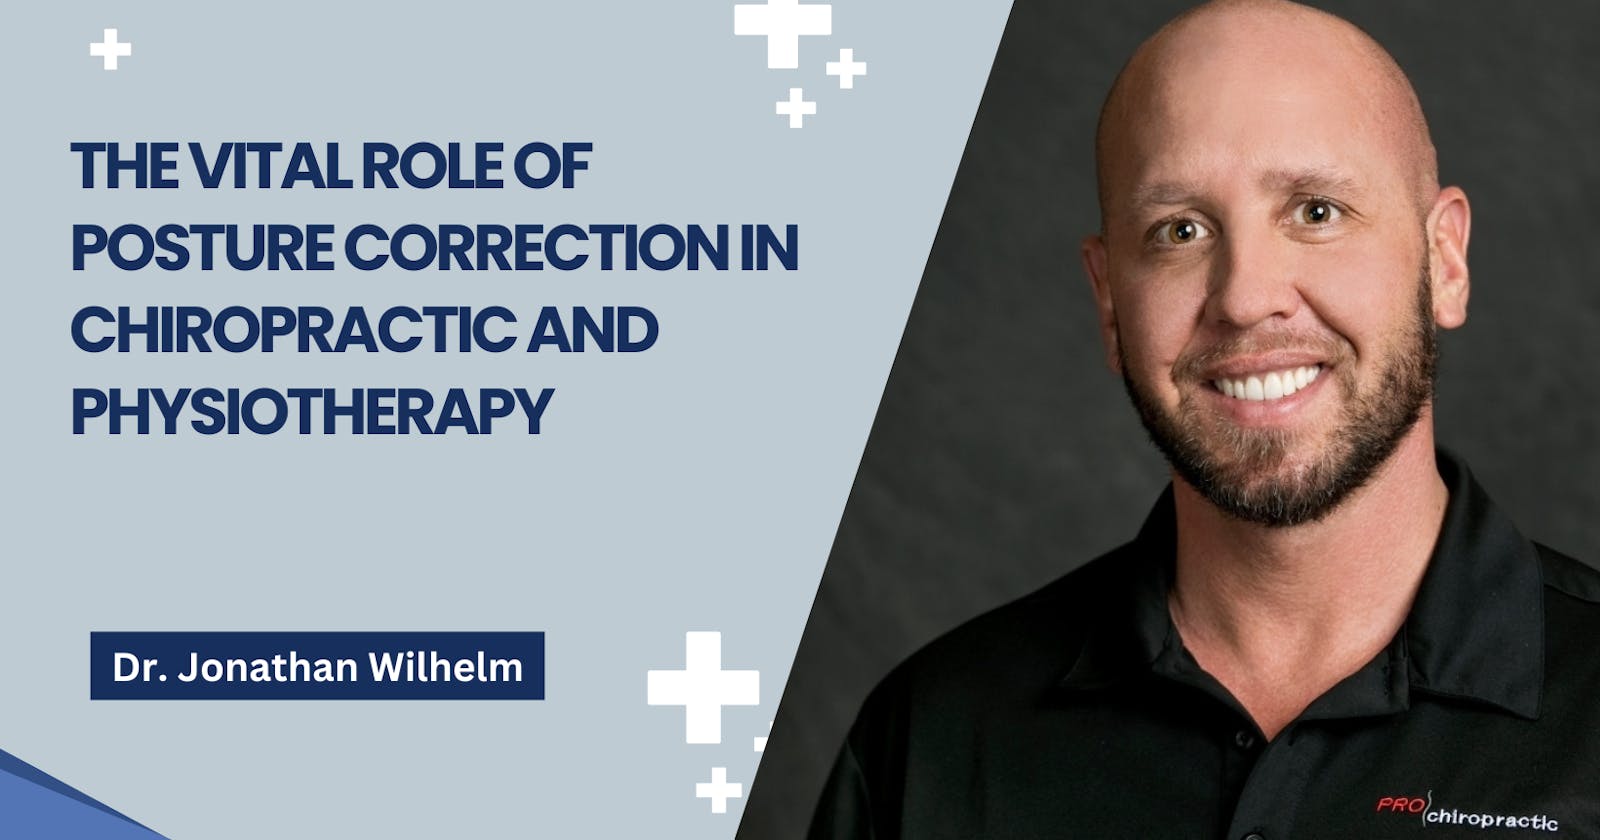 Jonathan Wilhelm | The Vital Role of Posture Correction in Chiropractic and Physiotherapy